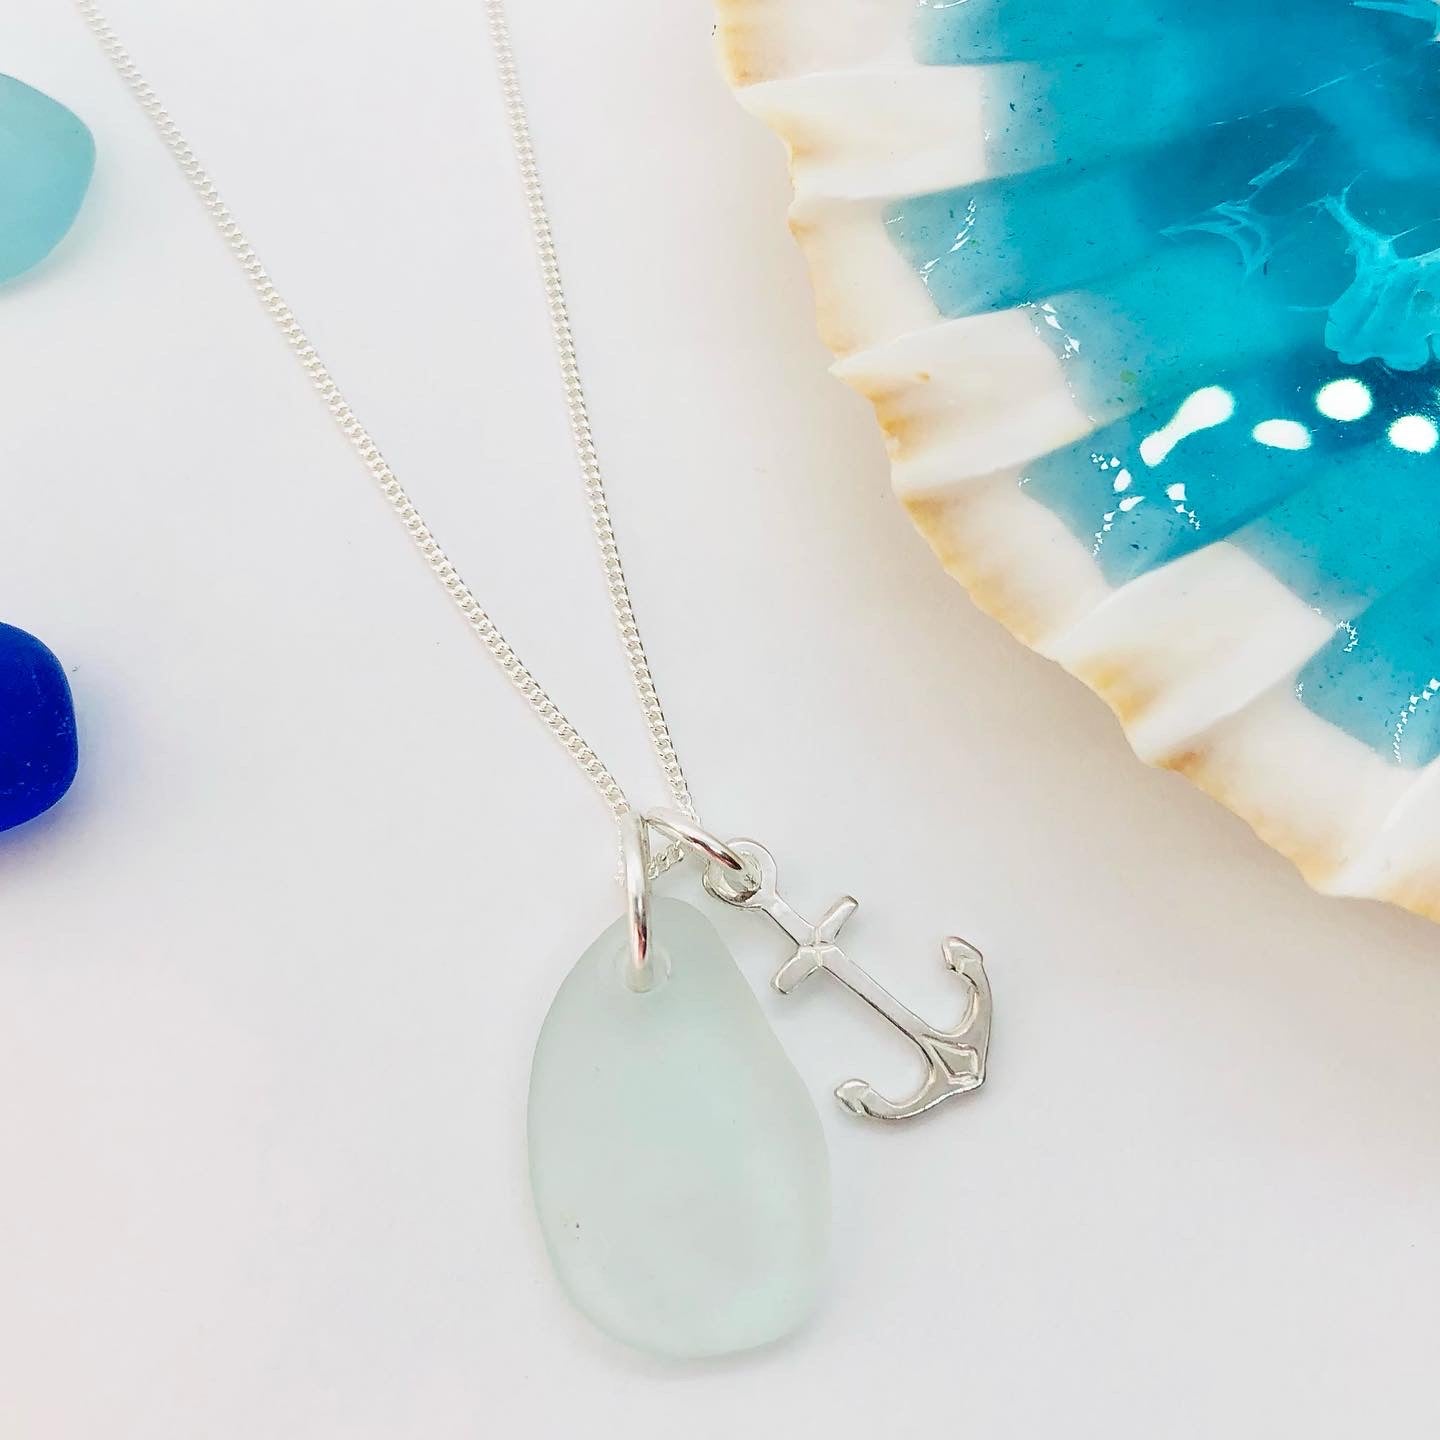 Cornish seaglass and sterling silver anchor necklace